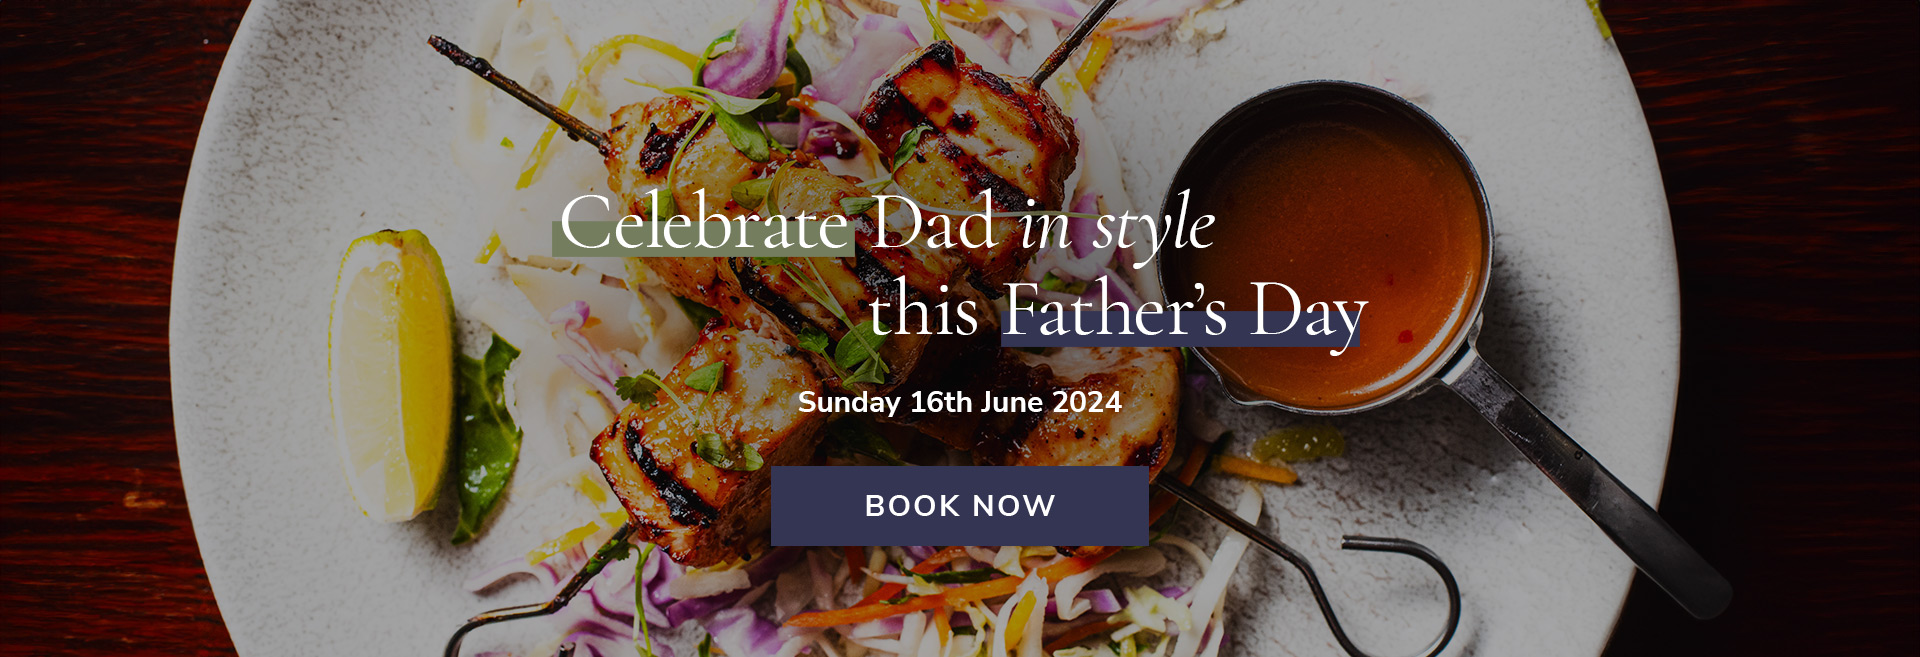 Father's Day at The White Horse